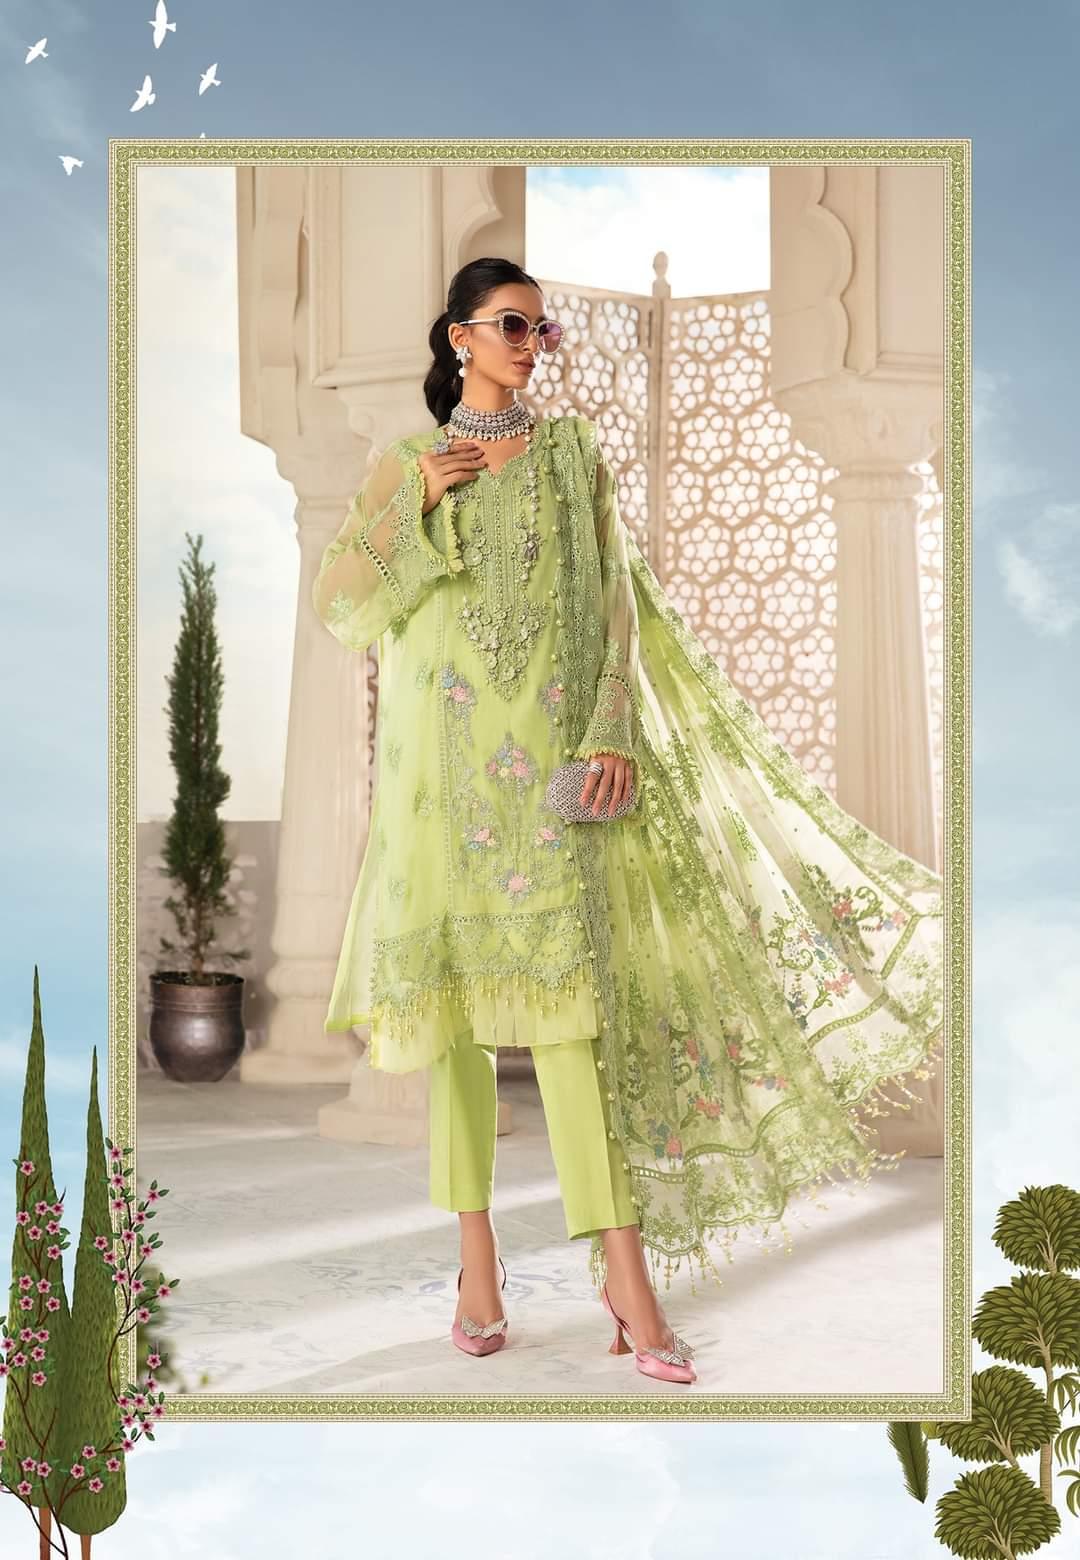 Maria.B Chiffons Collection'22- Design #8- Lime Green - Maria.B Chiffons Collection'22- Design #8- Lime Green - Shahana Collection